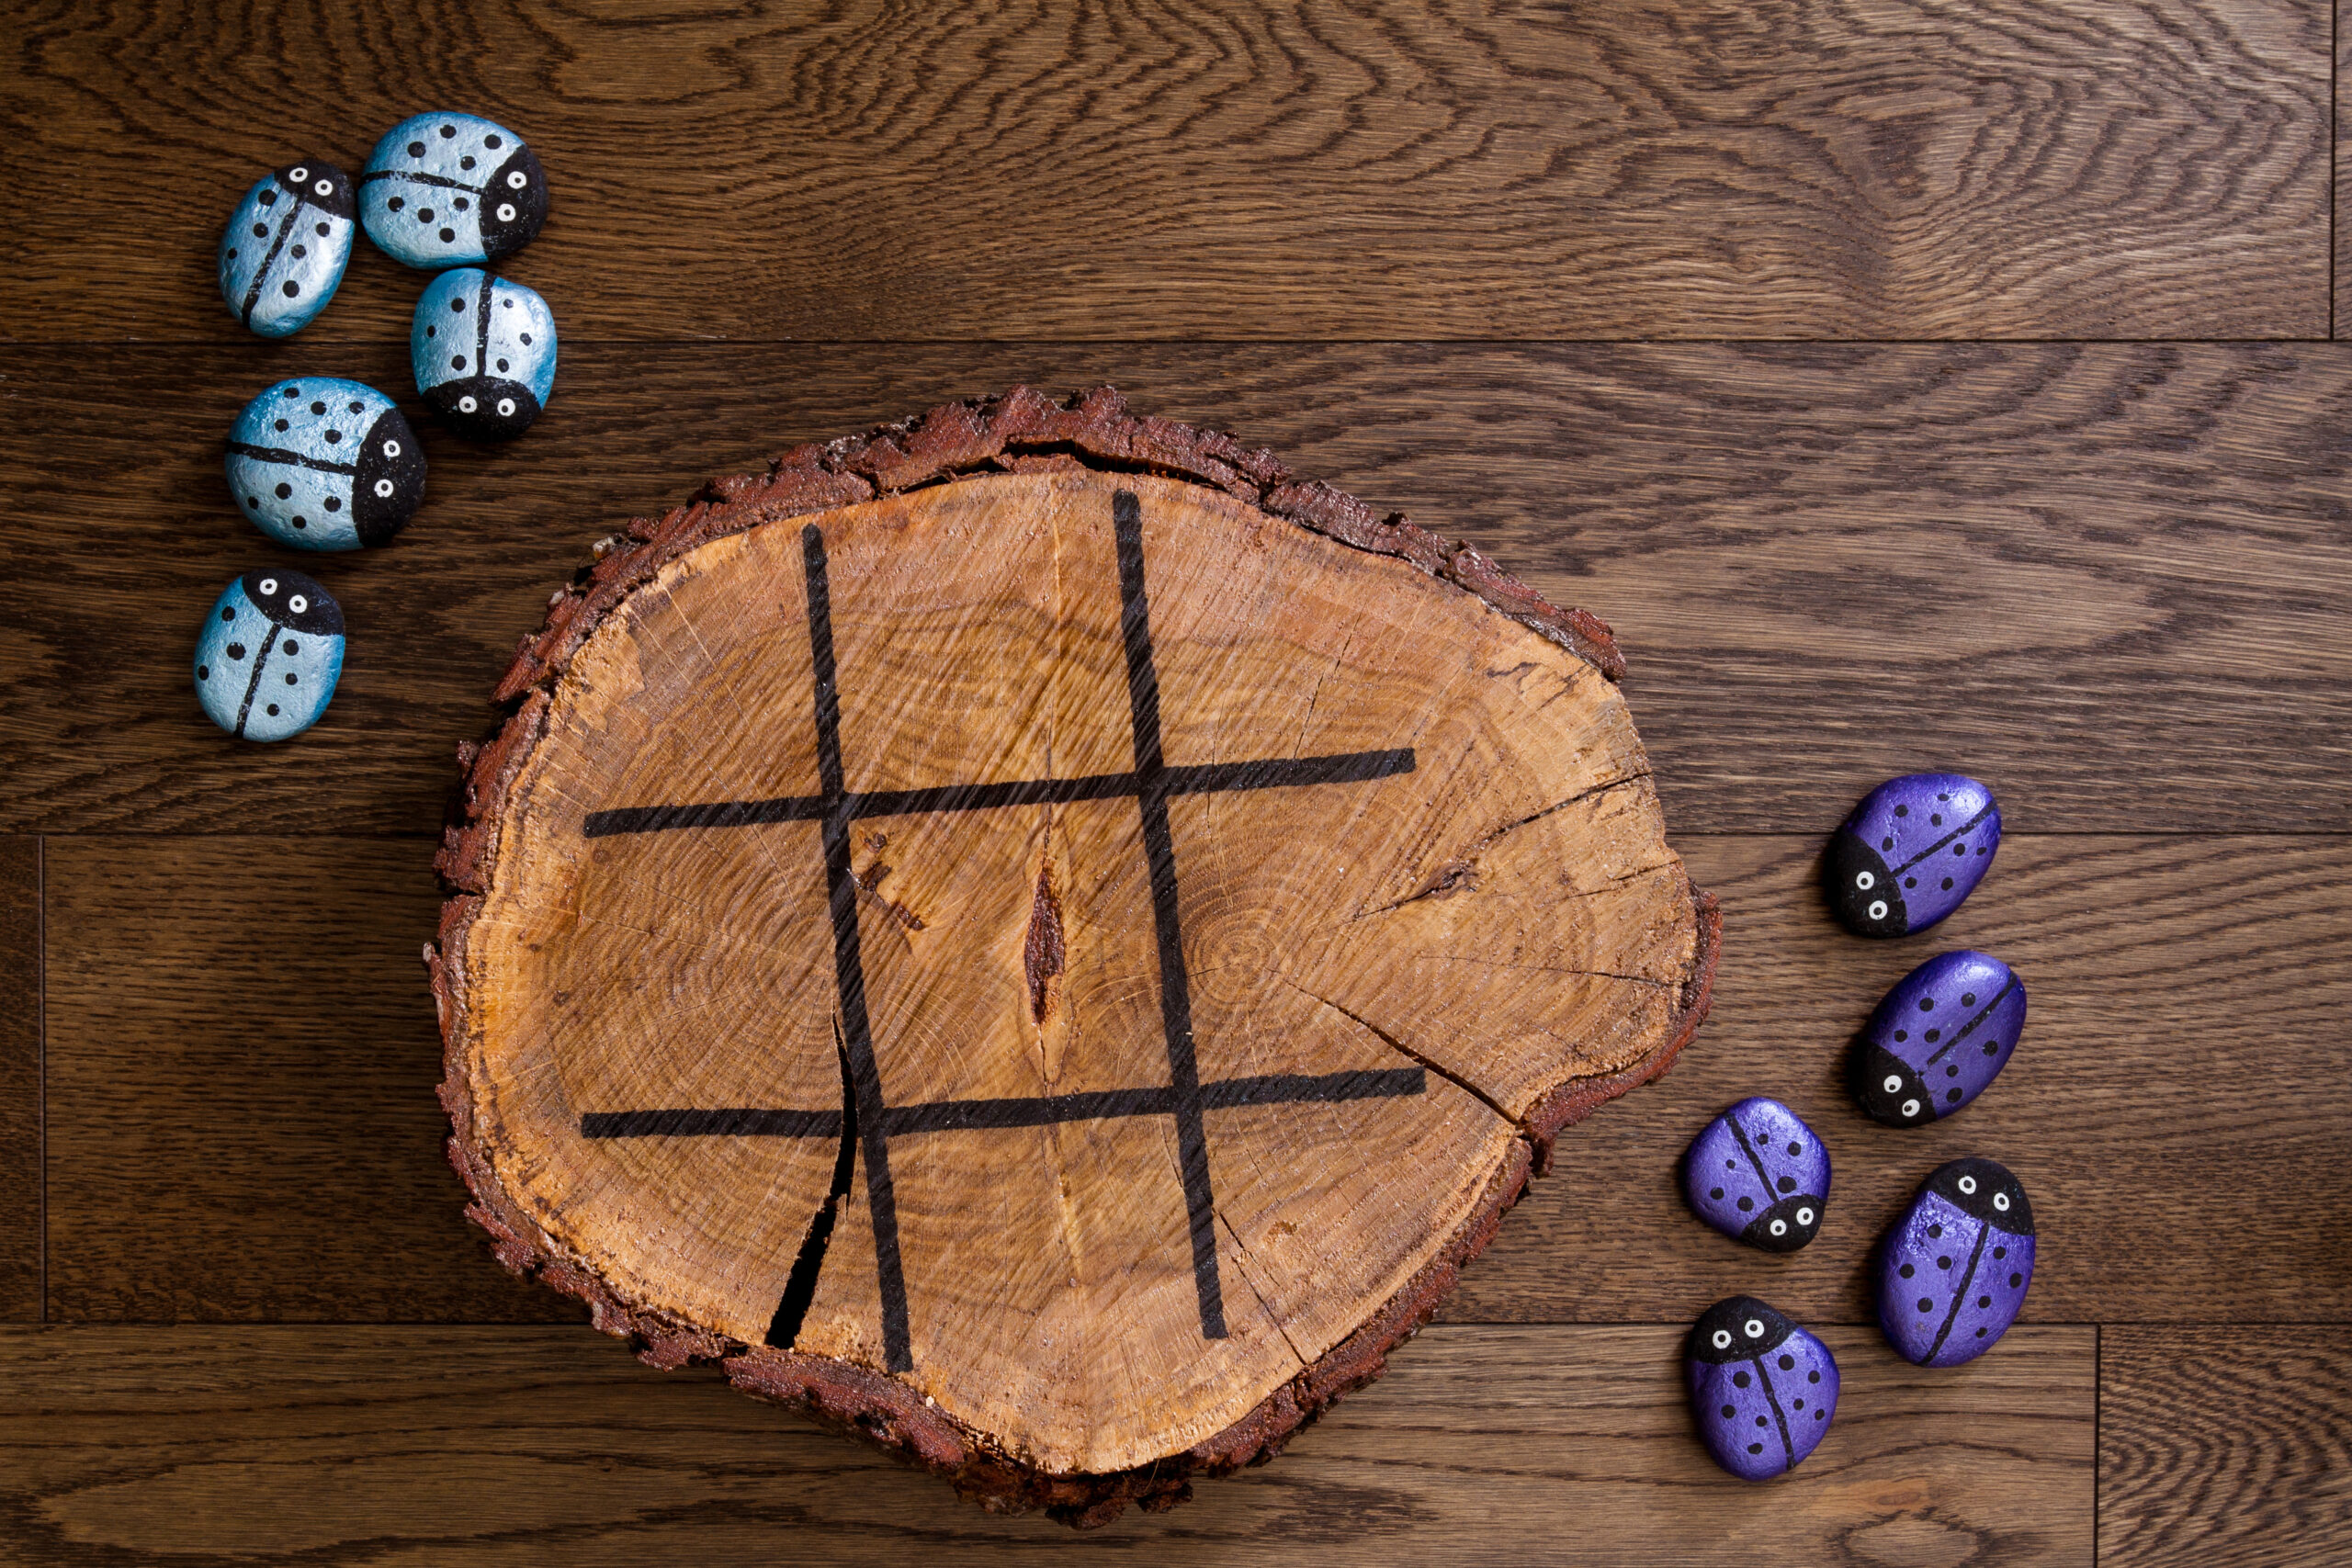 Hand Made Wood Burn Tic Tac Toe Game With Painted Rock Game Piec